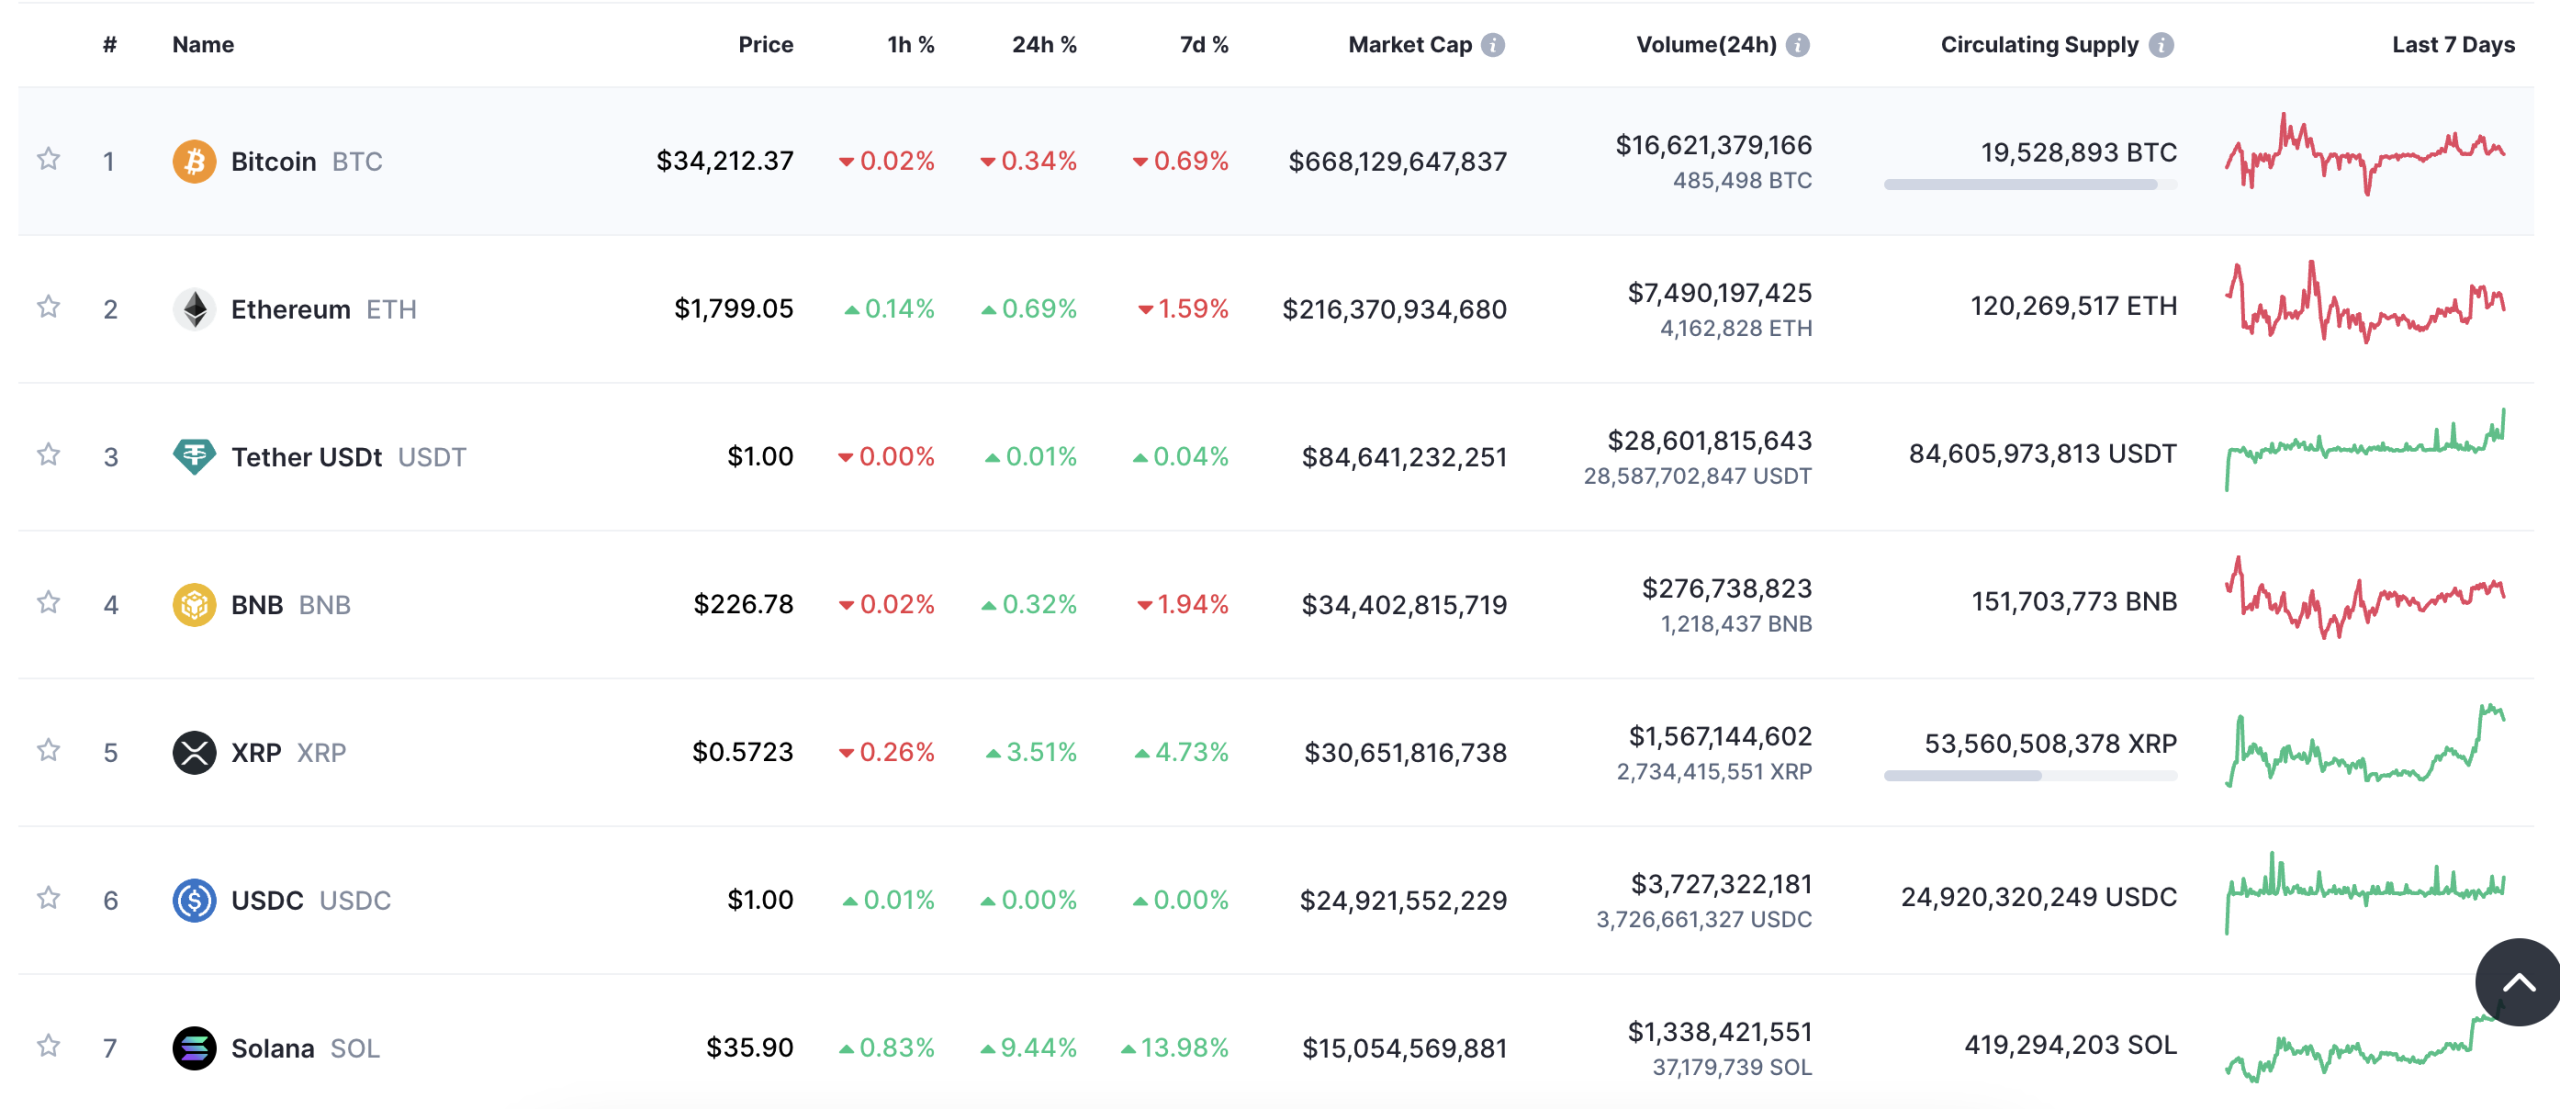 List of cryptocurrencies by market cap 